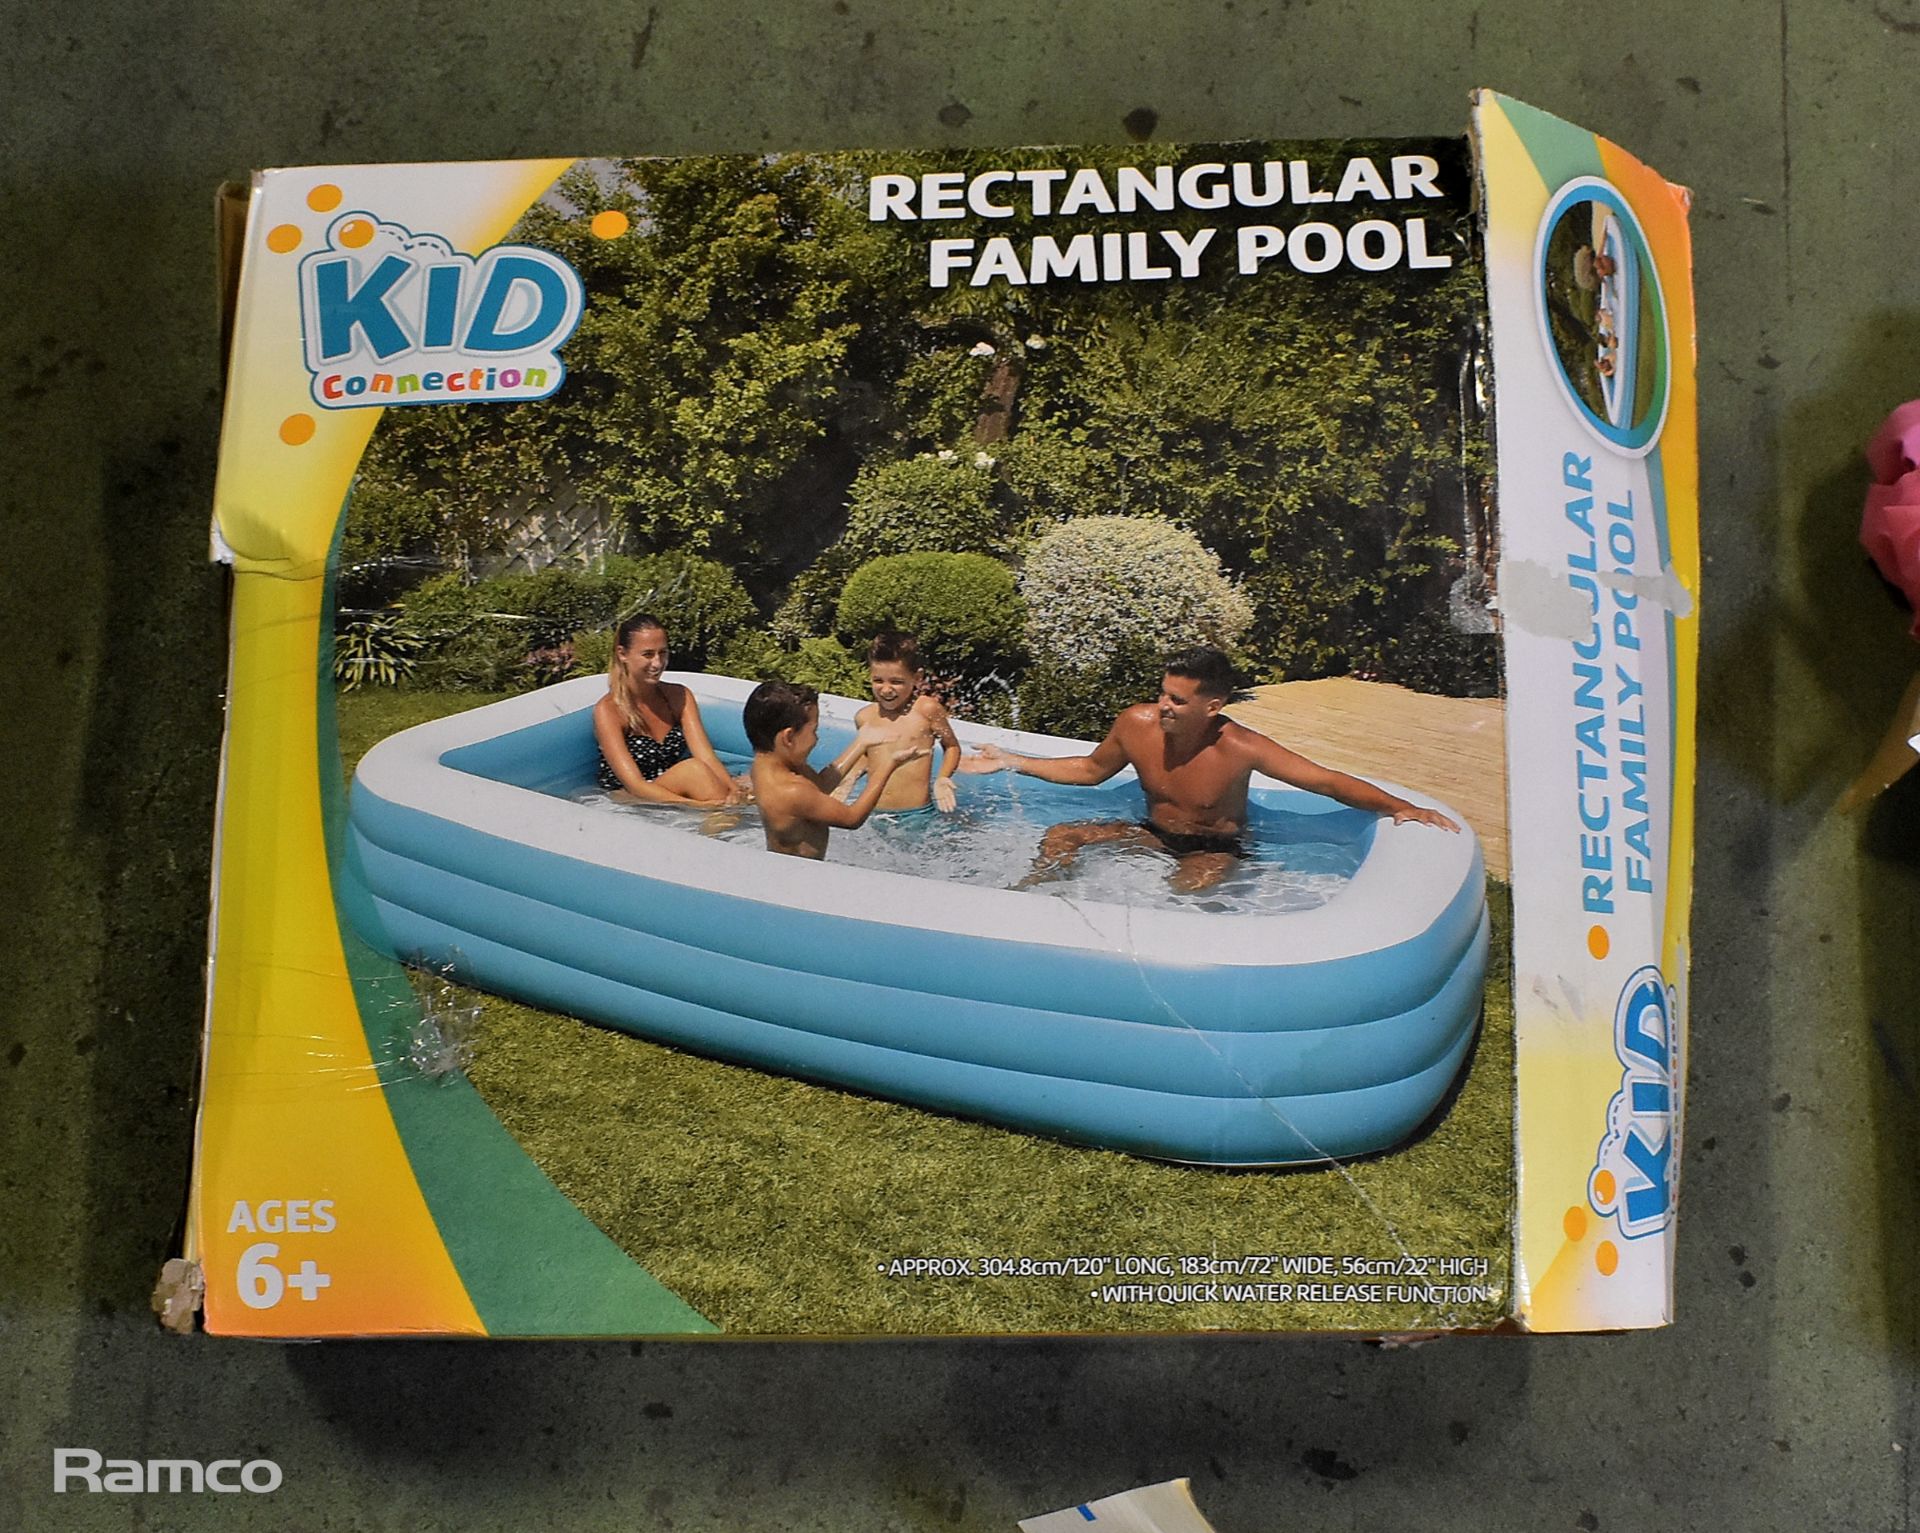 3x Kid Connection - various sized swimming pools - RETAIL RETURNS - Image 2 of 7